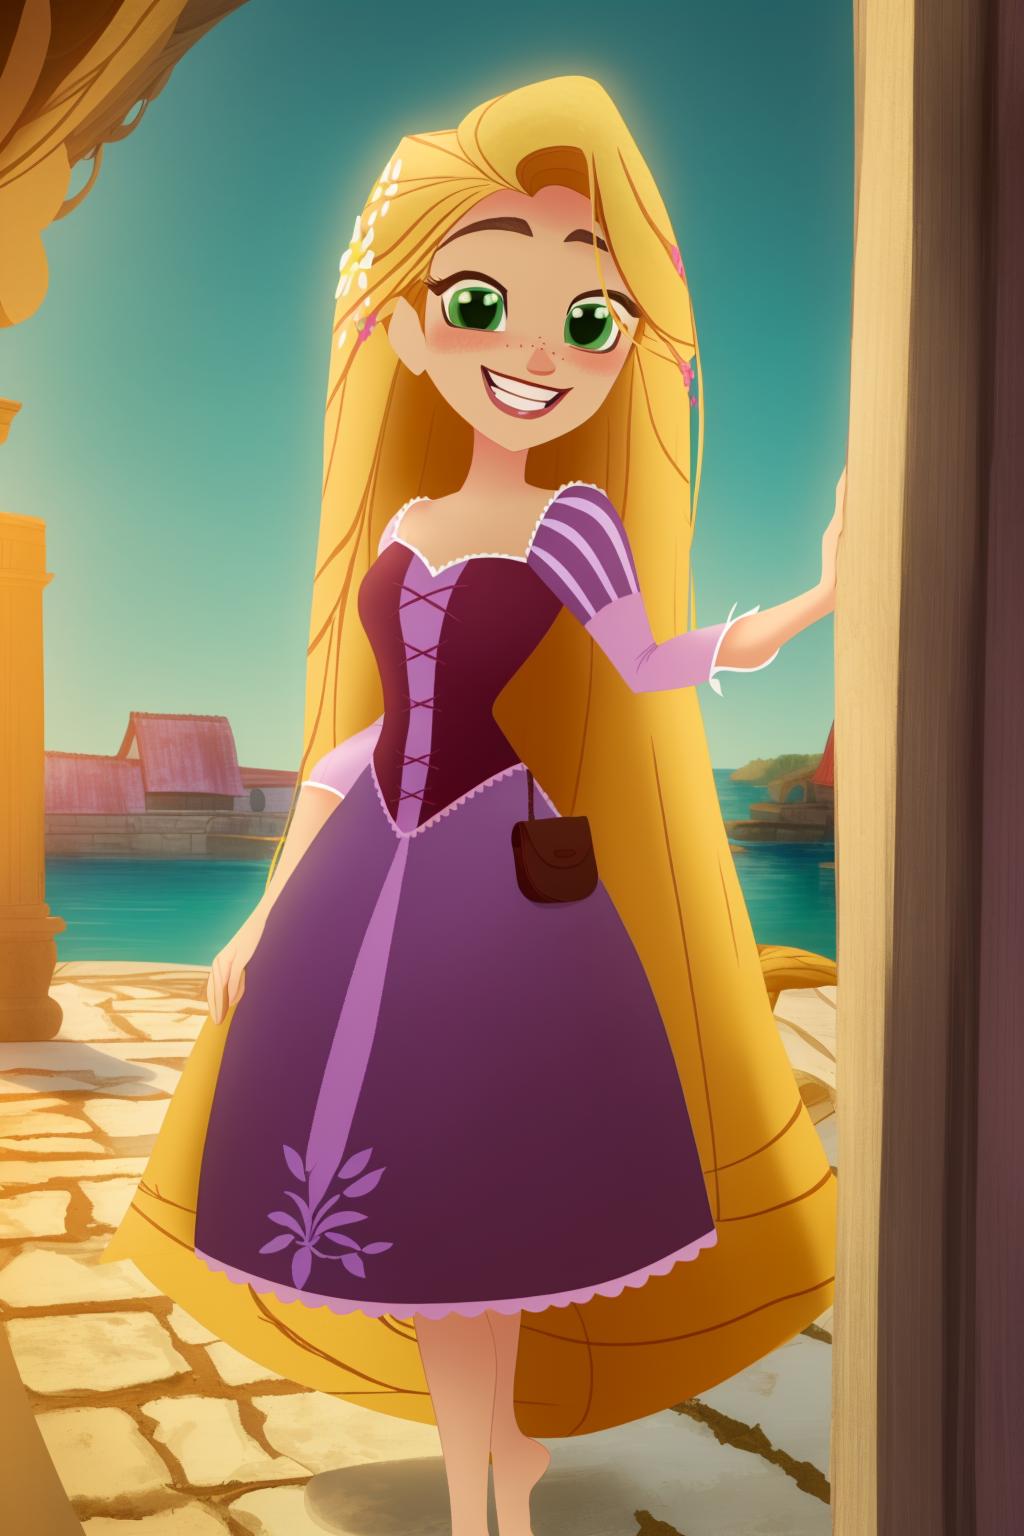 Rapunzel (Tangled series) image by chrgg